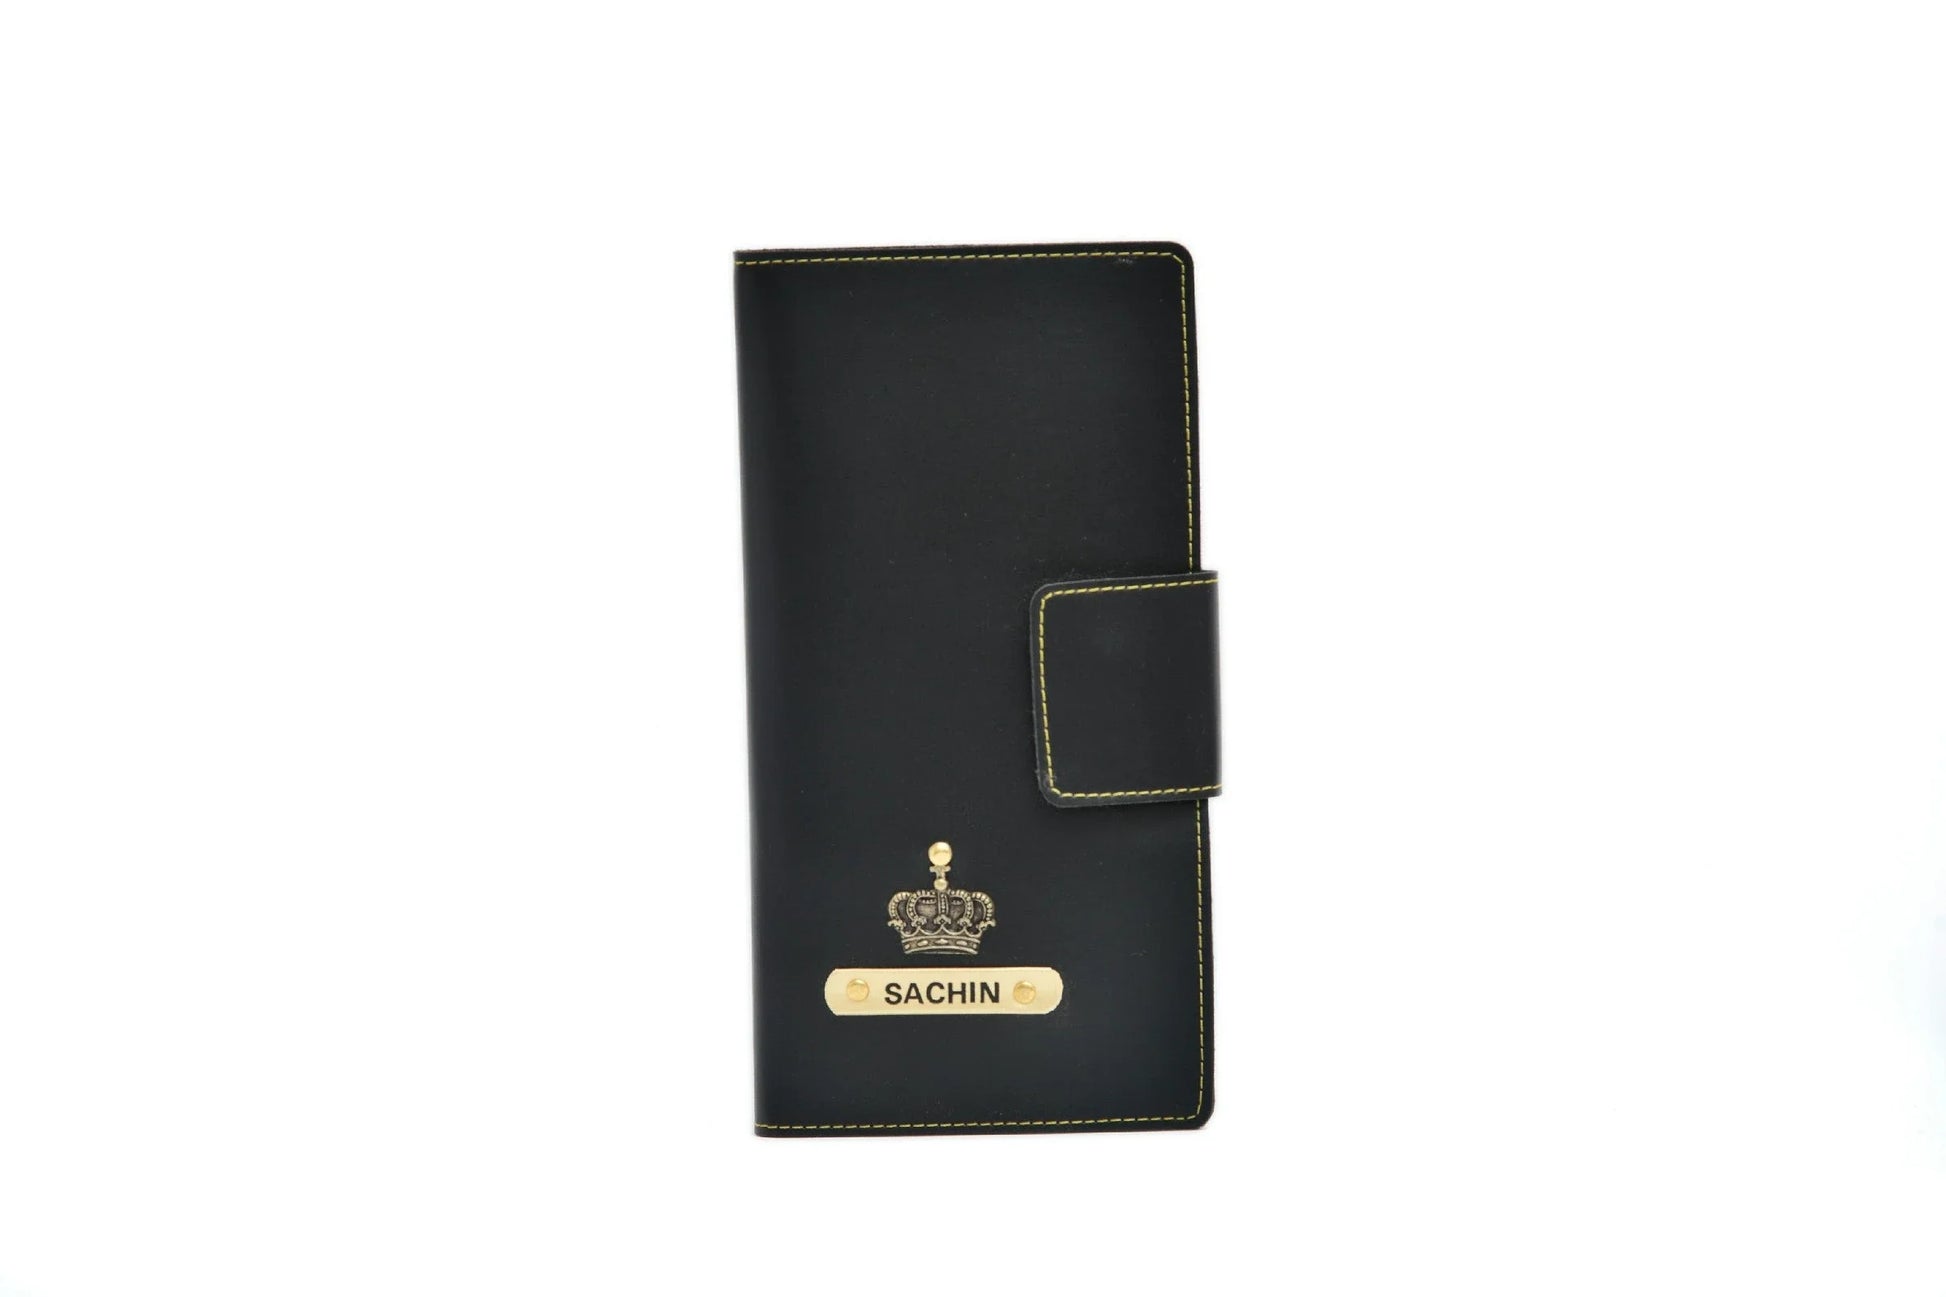 personalized-travel-wallet-black-customized-best-gift-for-boyfriend-girlfriendGet your high-quality, classy, affordable and long-lasting travel wallets now!